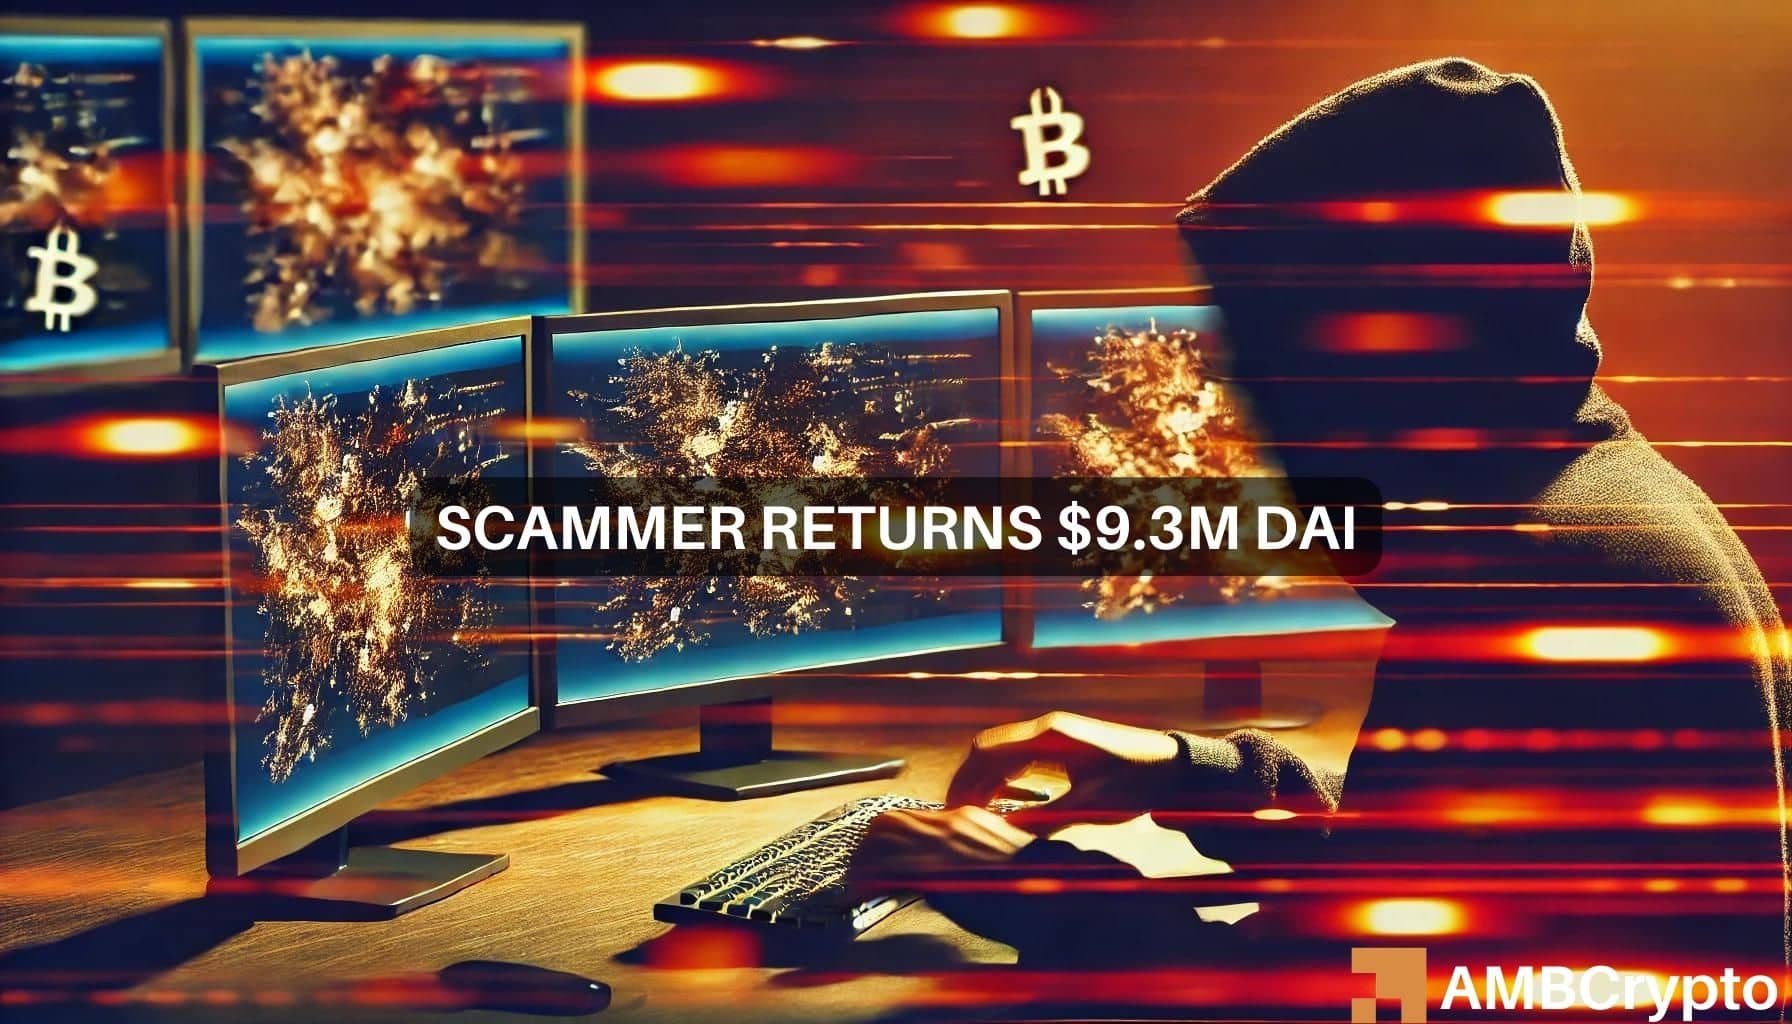 Crypto conscience? Scammer returns $9.3M stablecoins after 10 months